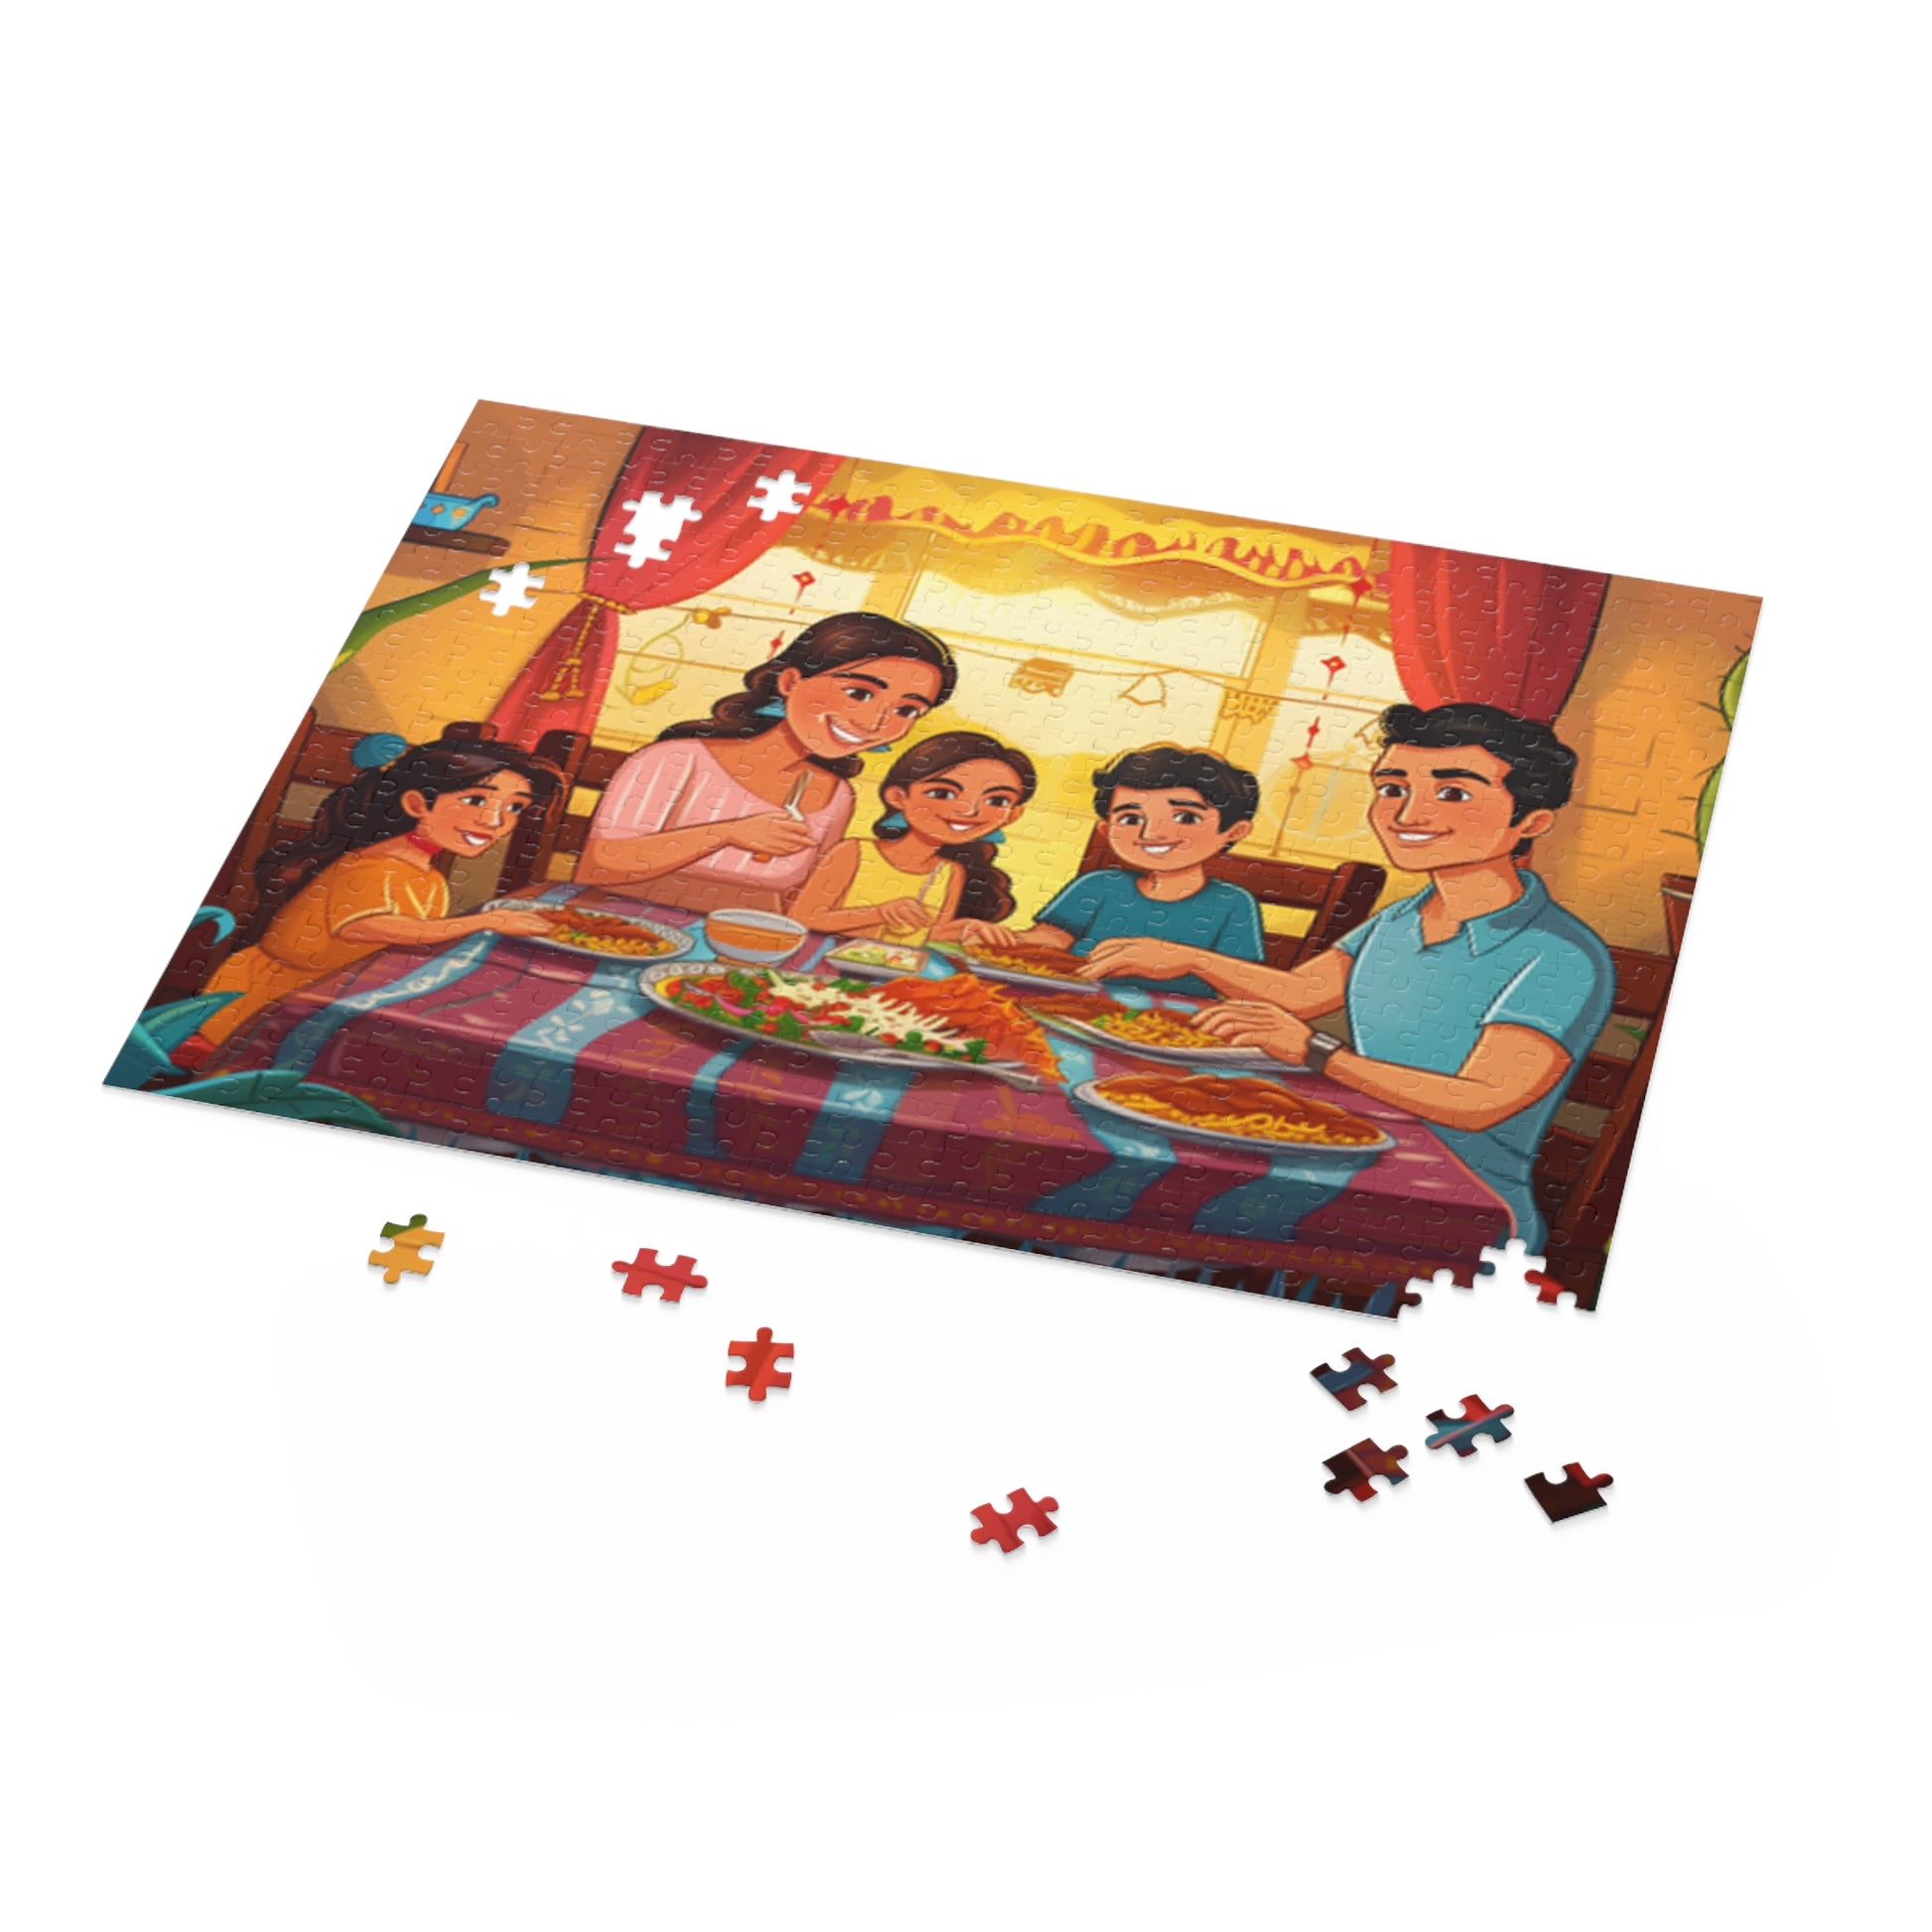 Mexican Family Retro Art Jigsaw Puzzle Adult Birthday Business Jigsaw Puzzle Gift for Him Funny Humorous Indoor Outdoor Game Gift For Her Online-5